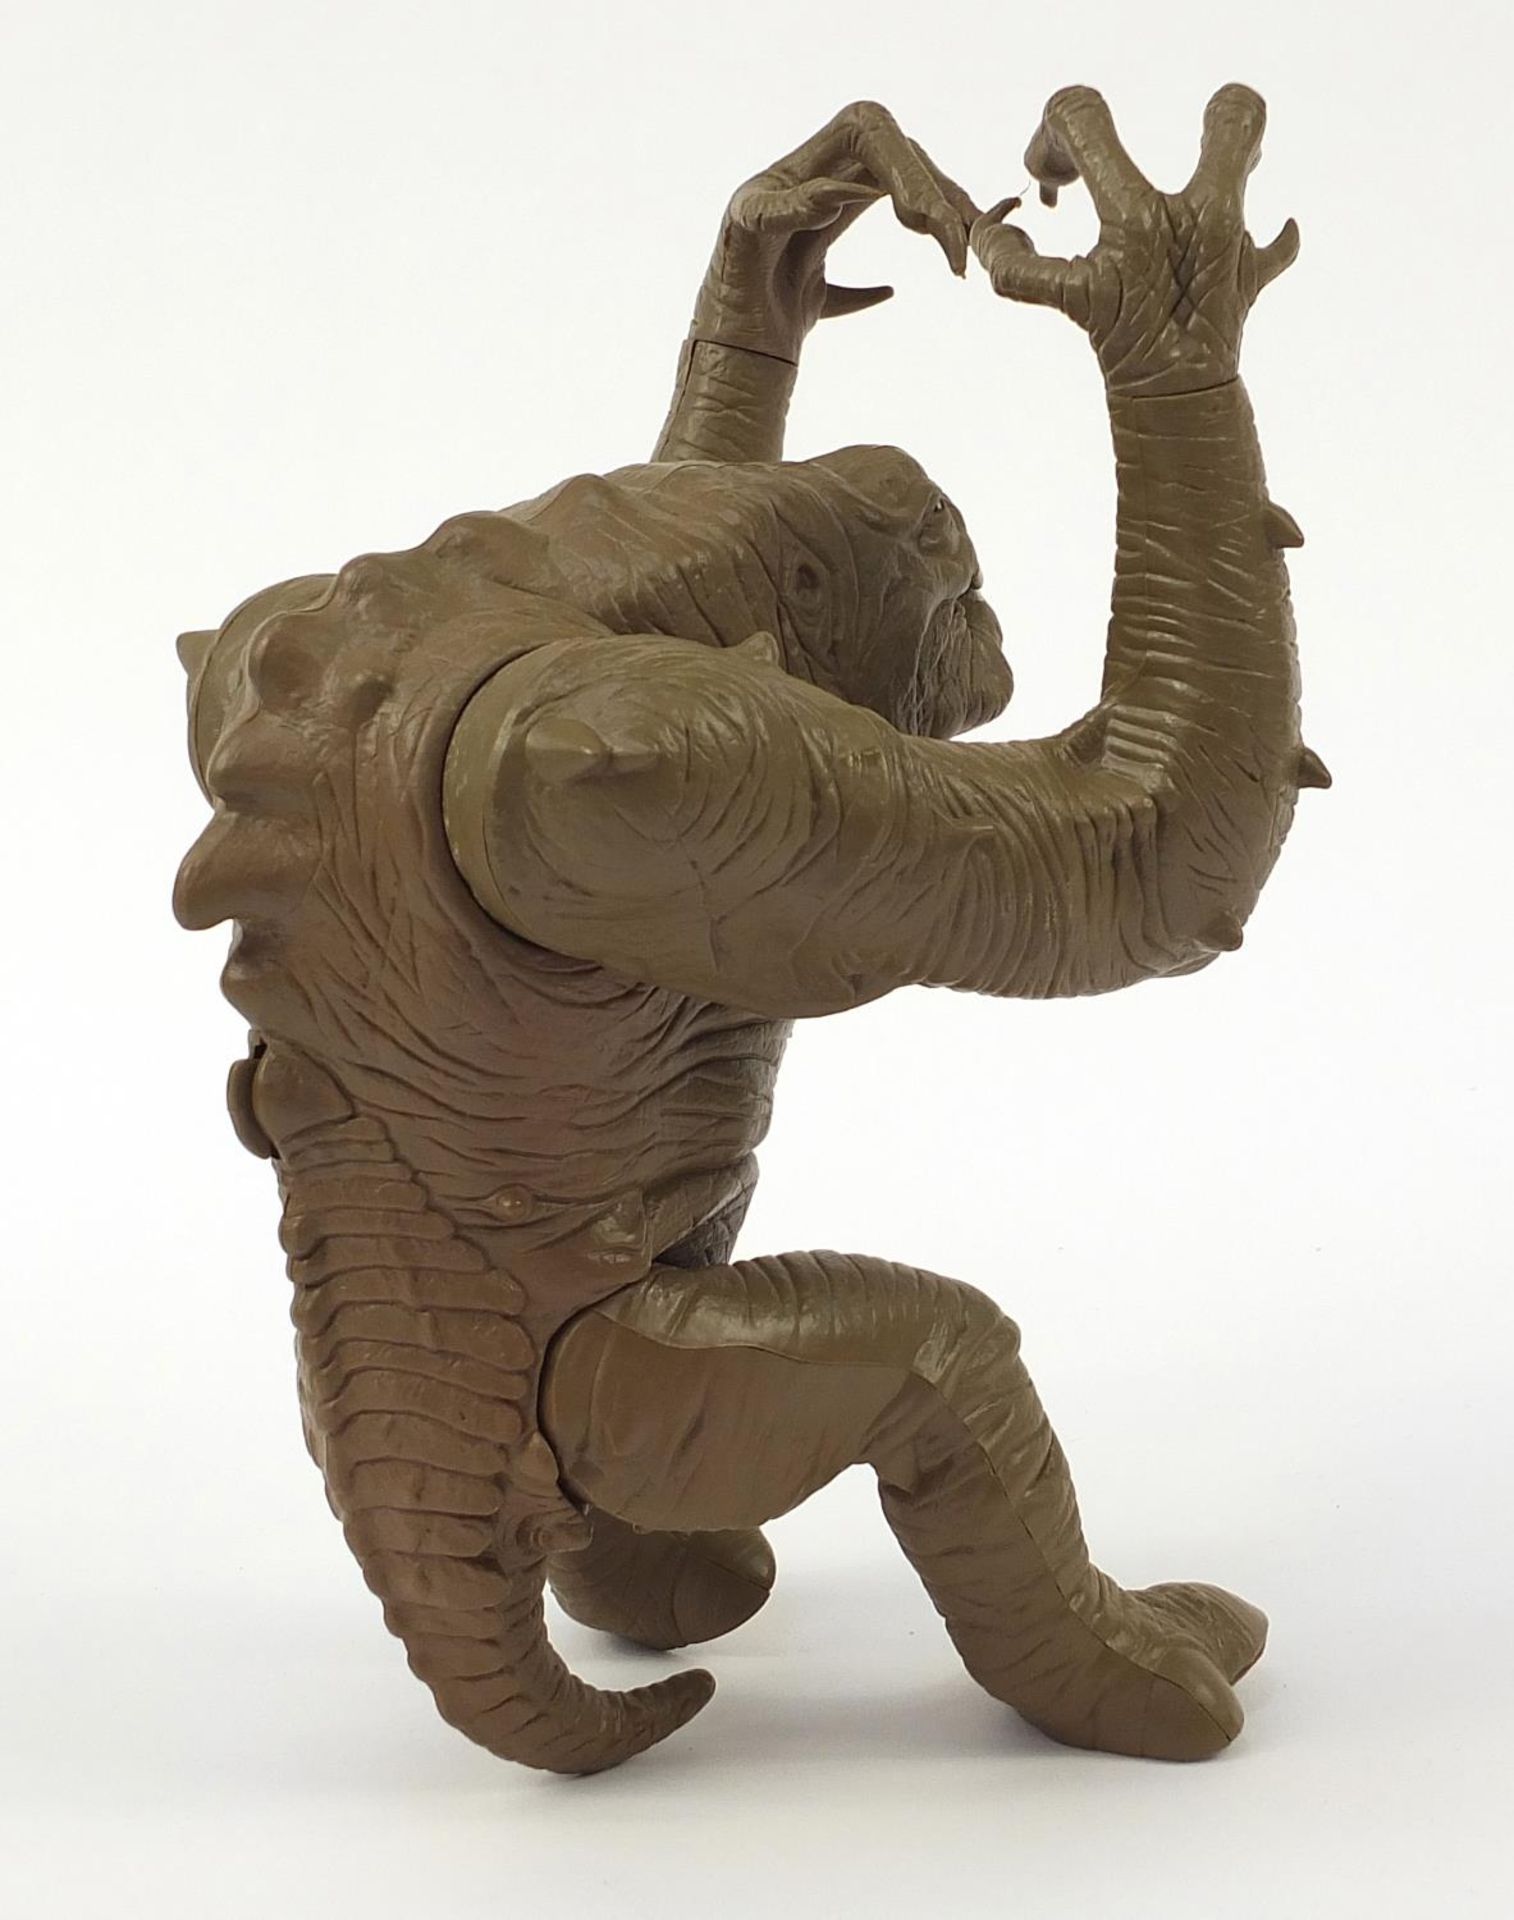 Vintage Star Wars Return of the Jedi Rancor Monster figure with box :For Further Condition Reports - Image 3 of 4